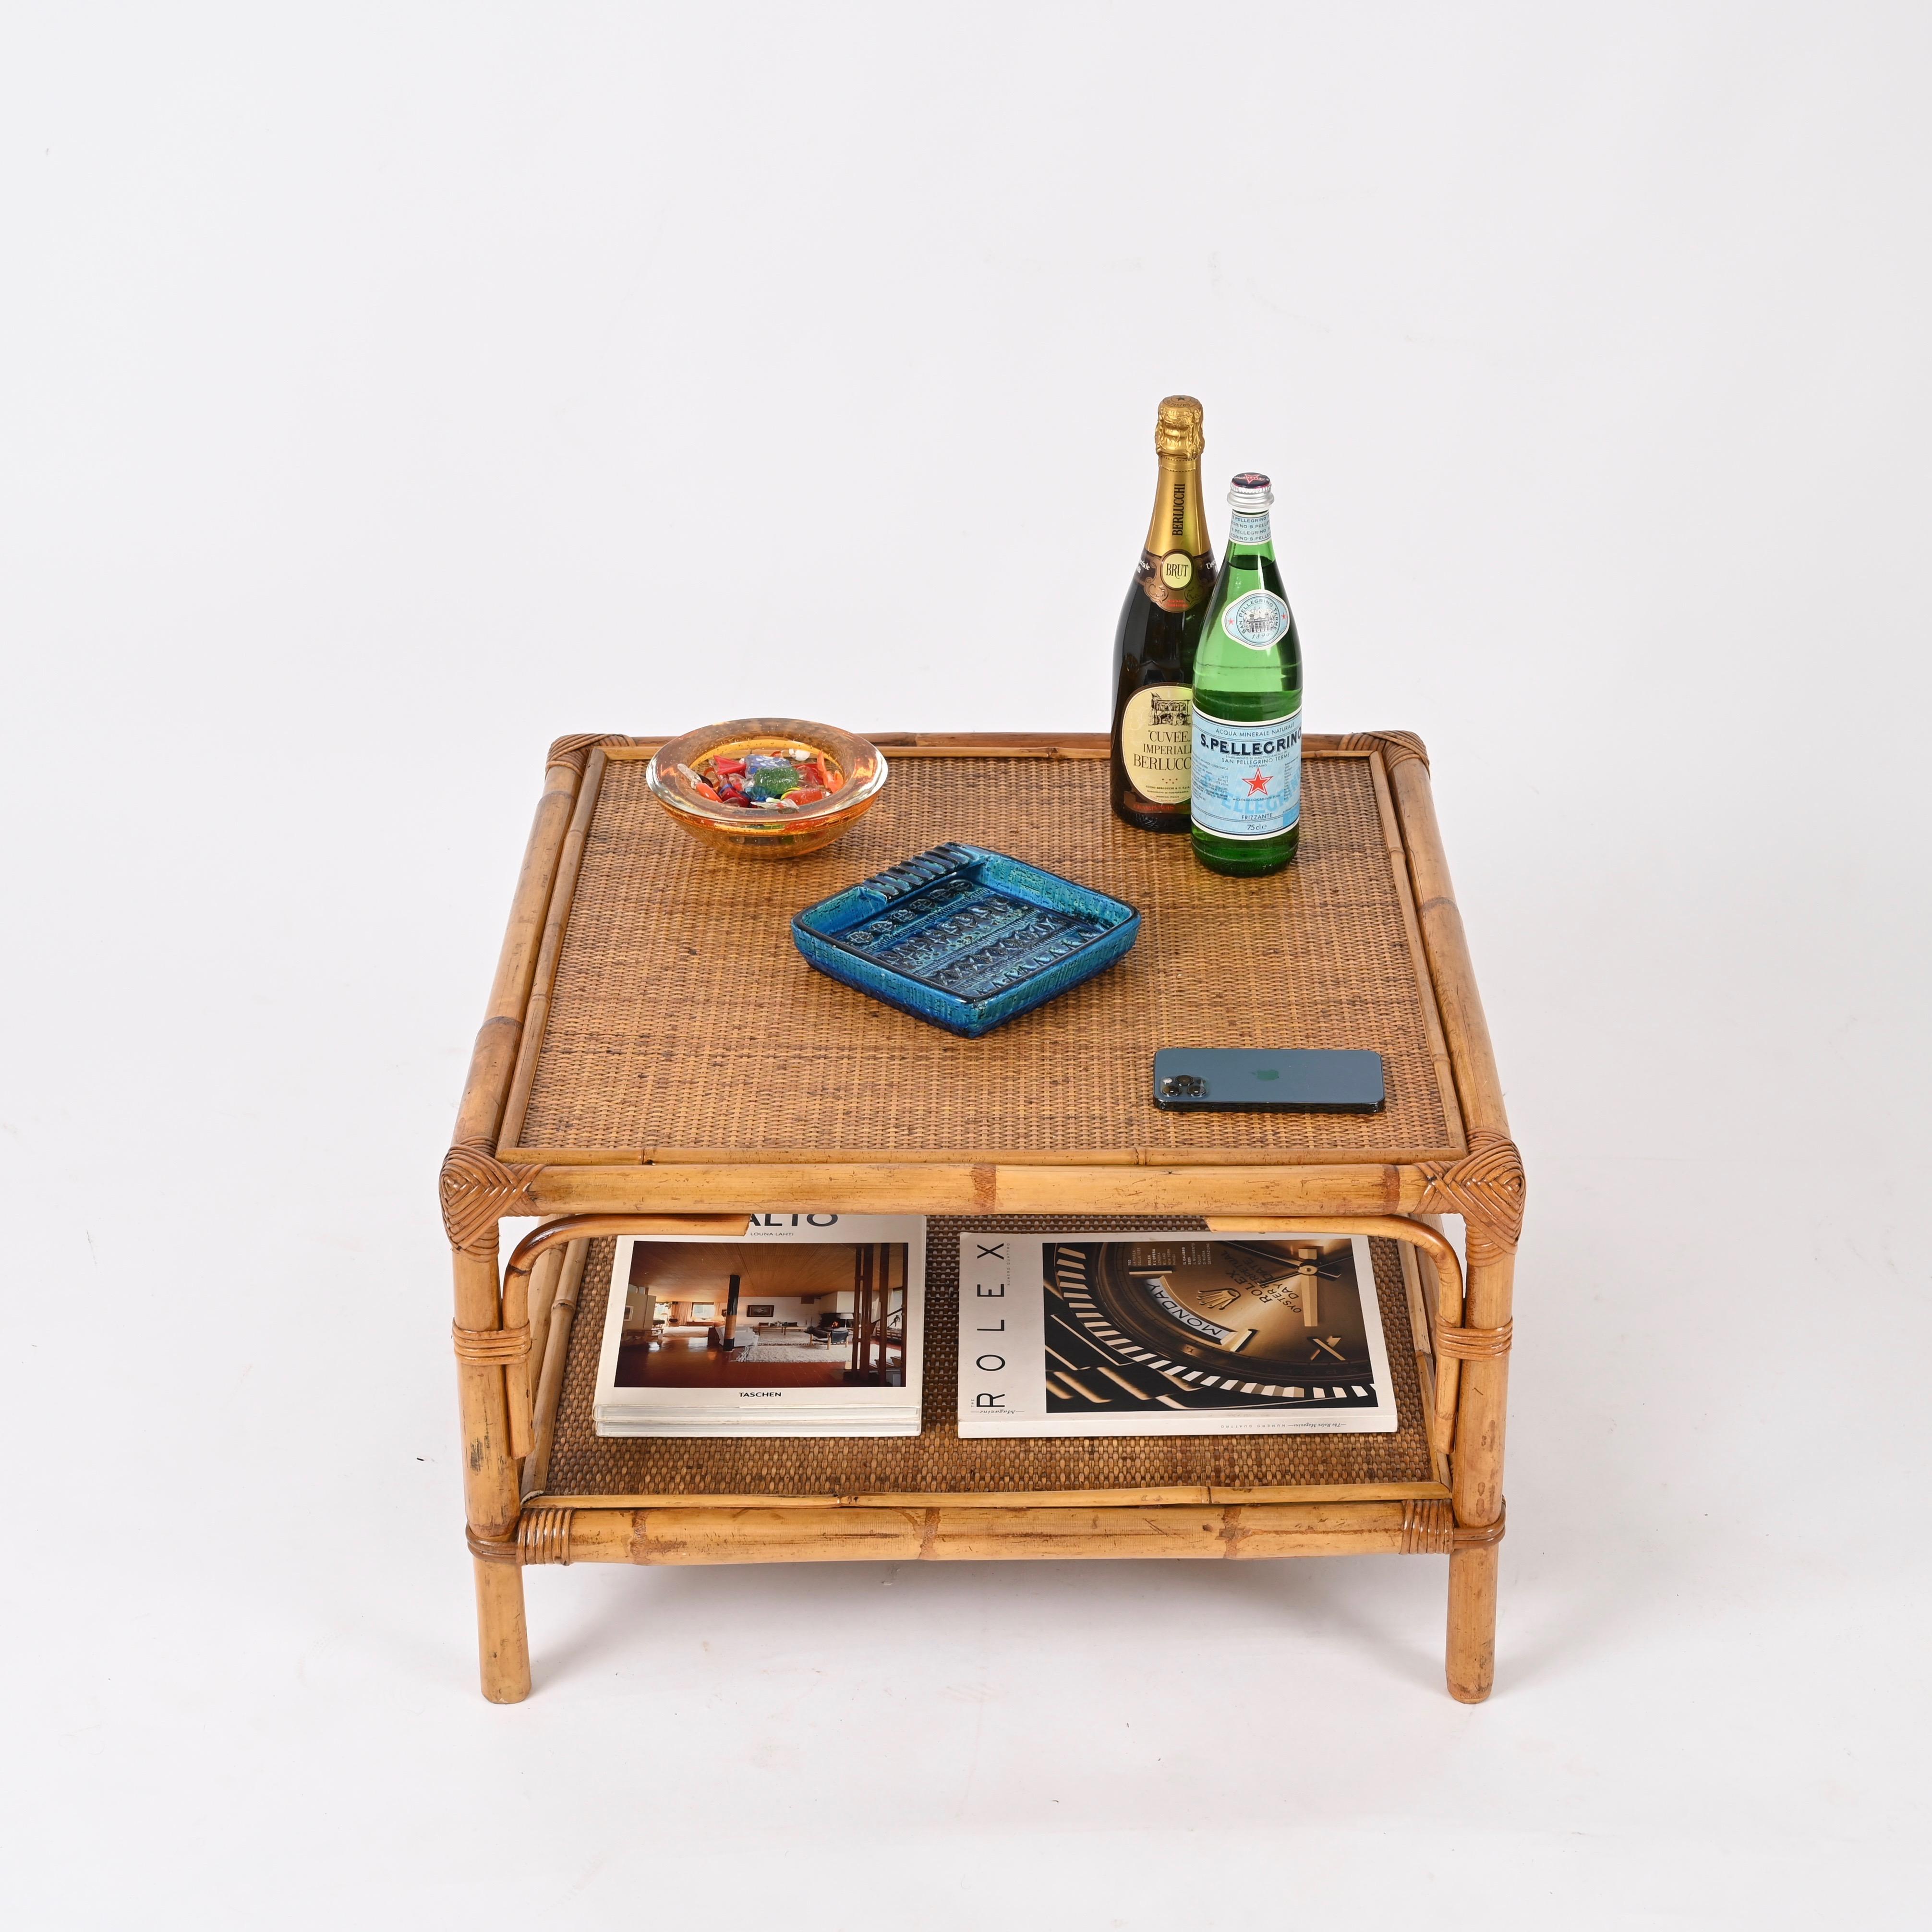 Hand-Crafted Vivai del Sud Midcentury Italian Square Coffee Table in Bamboo and Rattan, 1970s